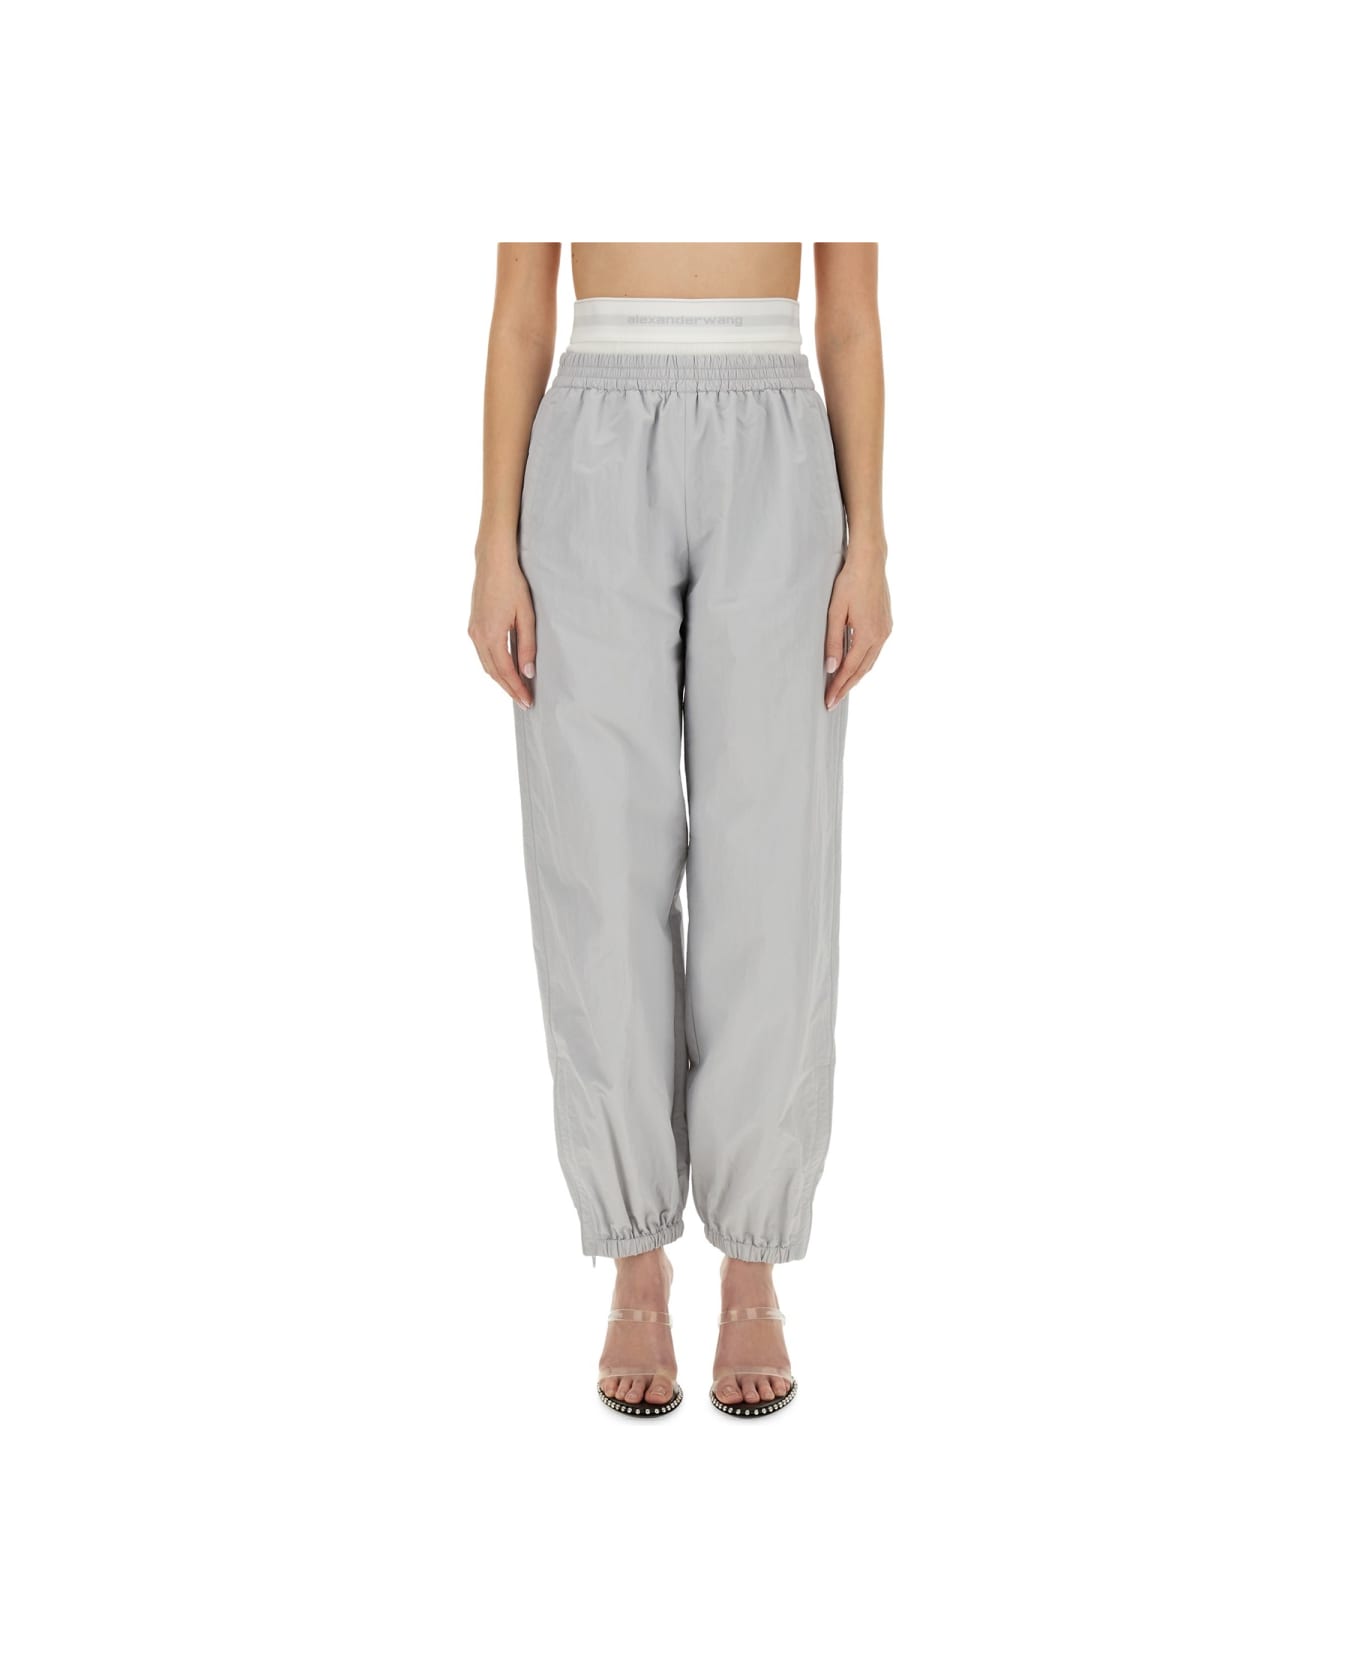 Alexander Wang Sports Pants With Integrated Underwear - GREY